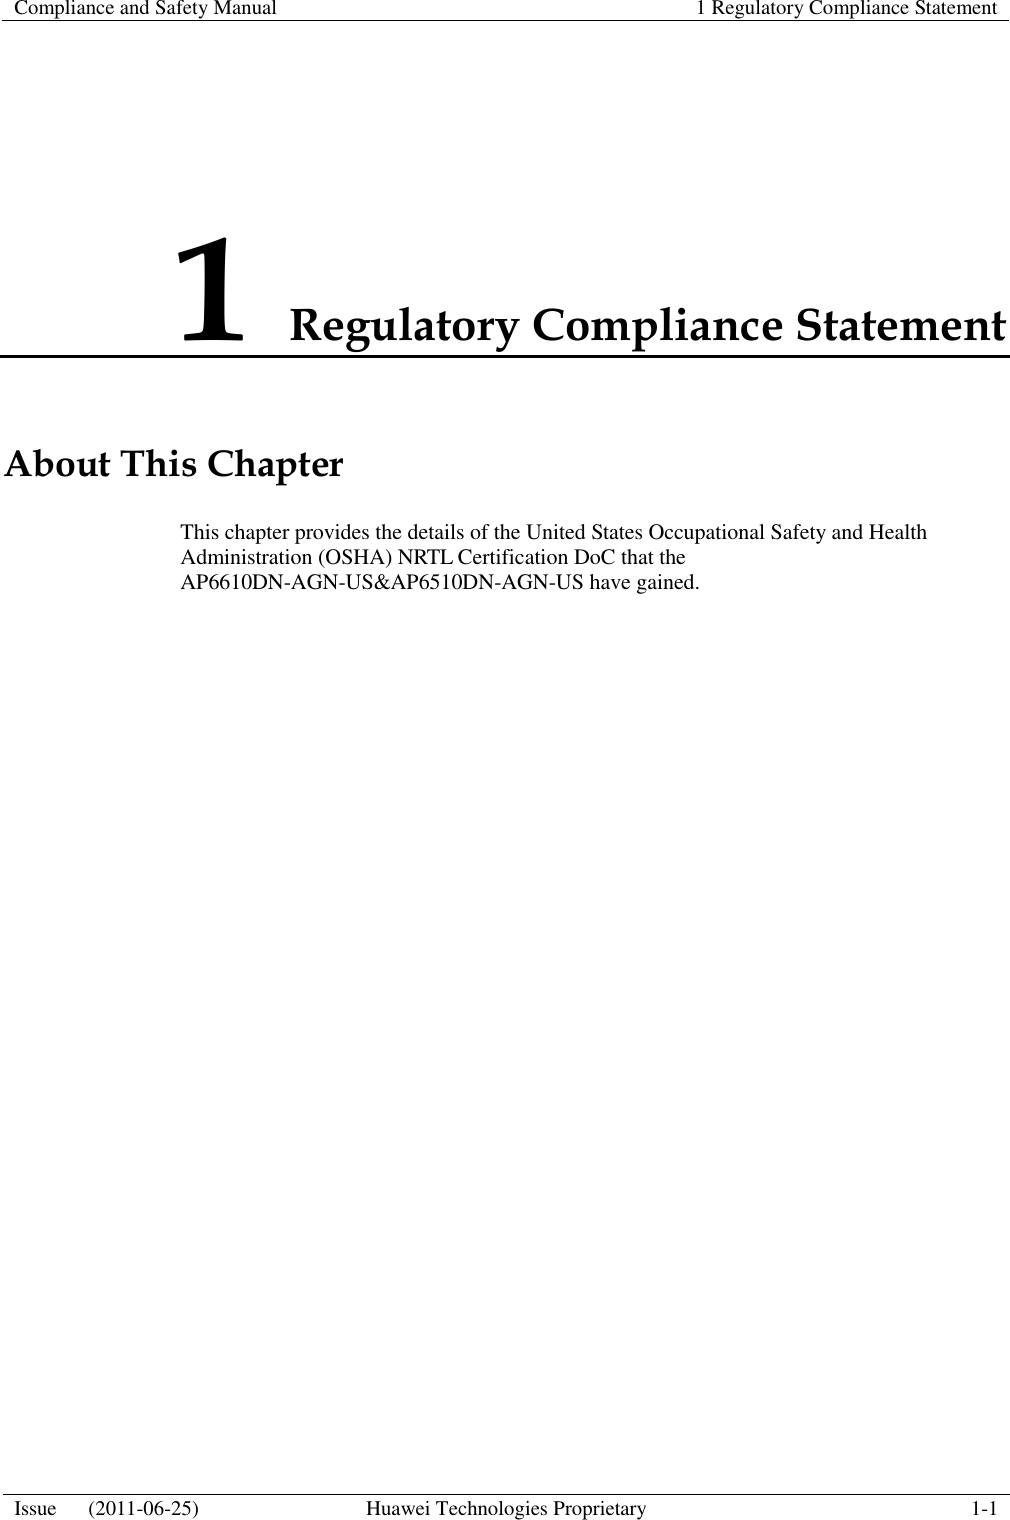    Compliance and Safety Manual 1 Regulatory Compliance Statement  Issue      (2011-06-25) Huawei Technologies Proprietary 1-1  1 Regulatory Compliance Statement About This Chapter This chapter provides the details of the United States Occupational Safety and Health Administration (OSHA) NRTL Certification DoC that the AP6610DN-AGN-US&amp;AP6510DN-AGN-US have gained. 